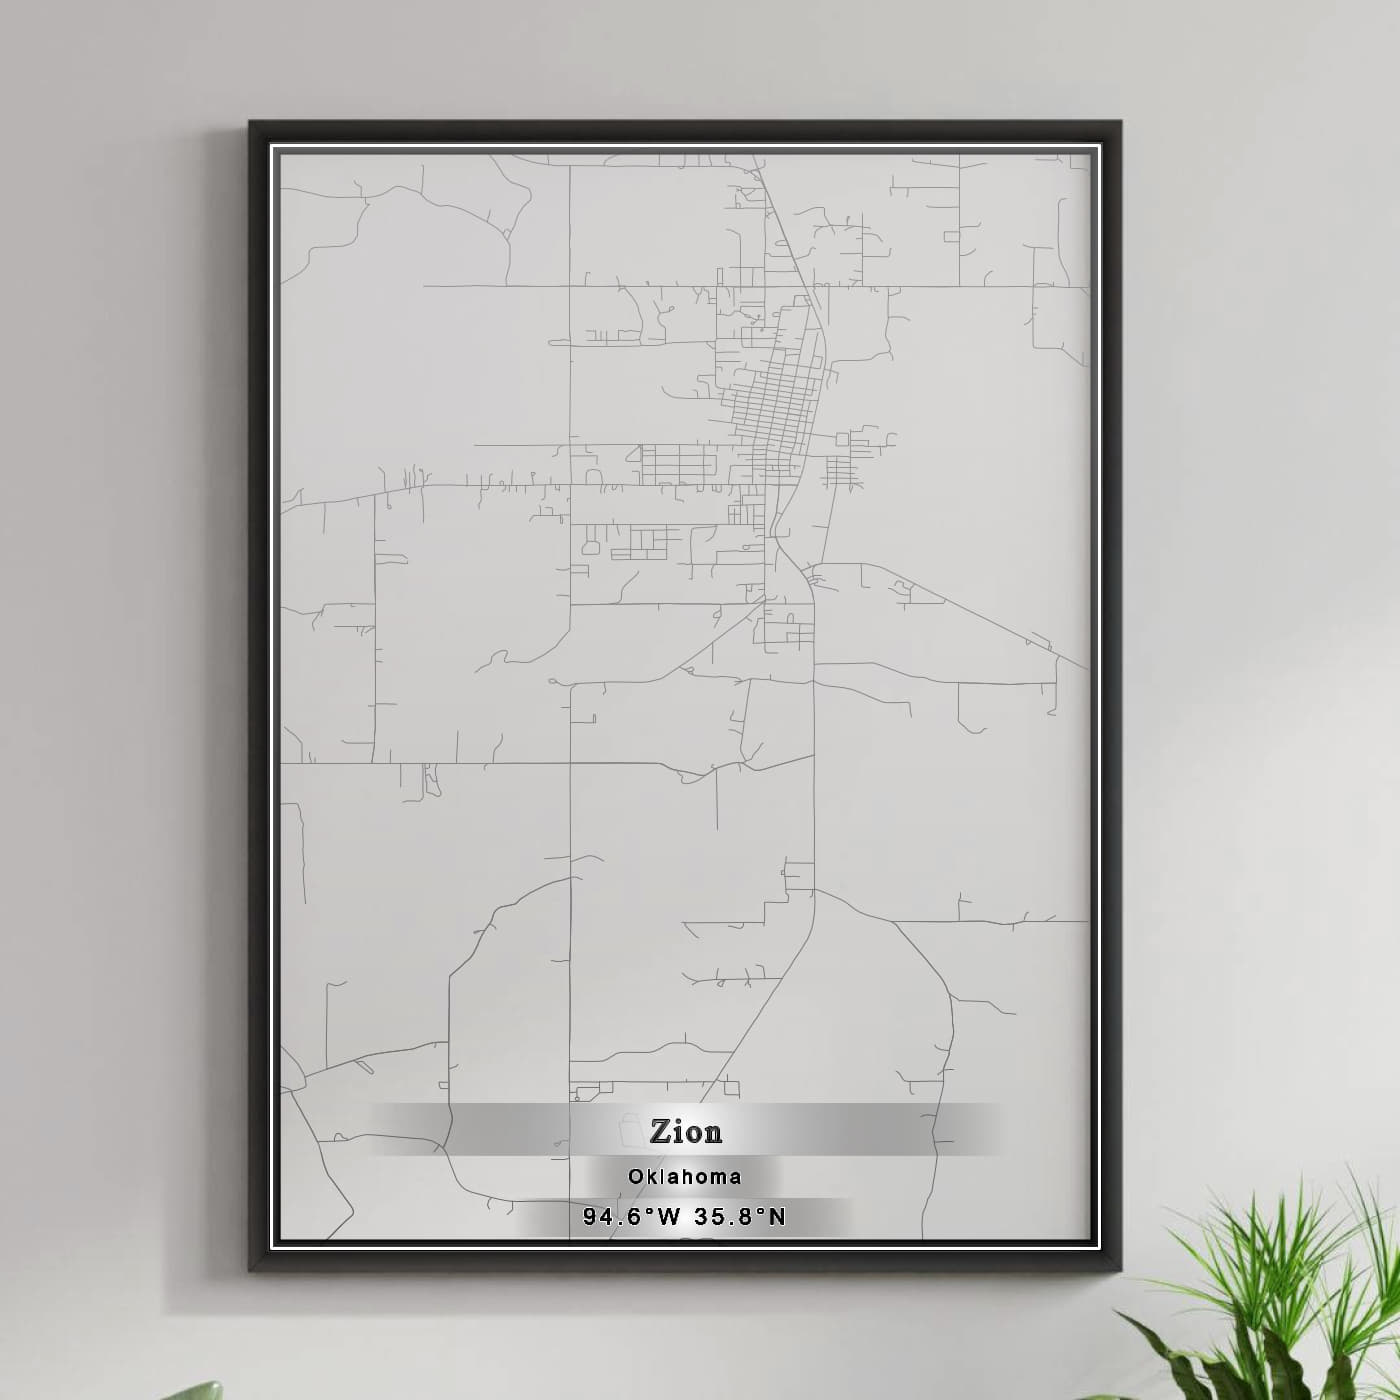 ROAD MAP OF ZION, OKLAHOMA BY MAPBAKES